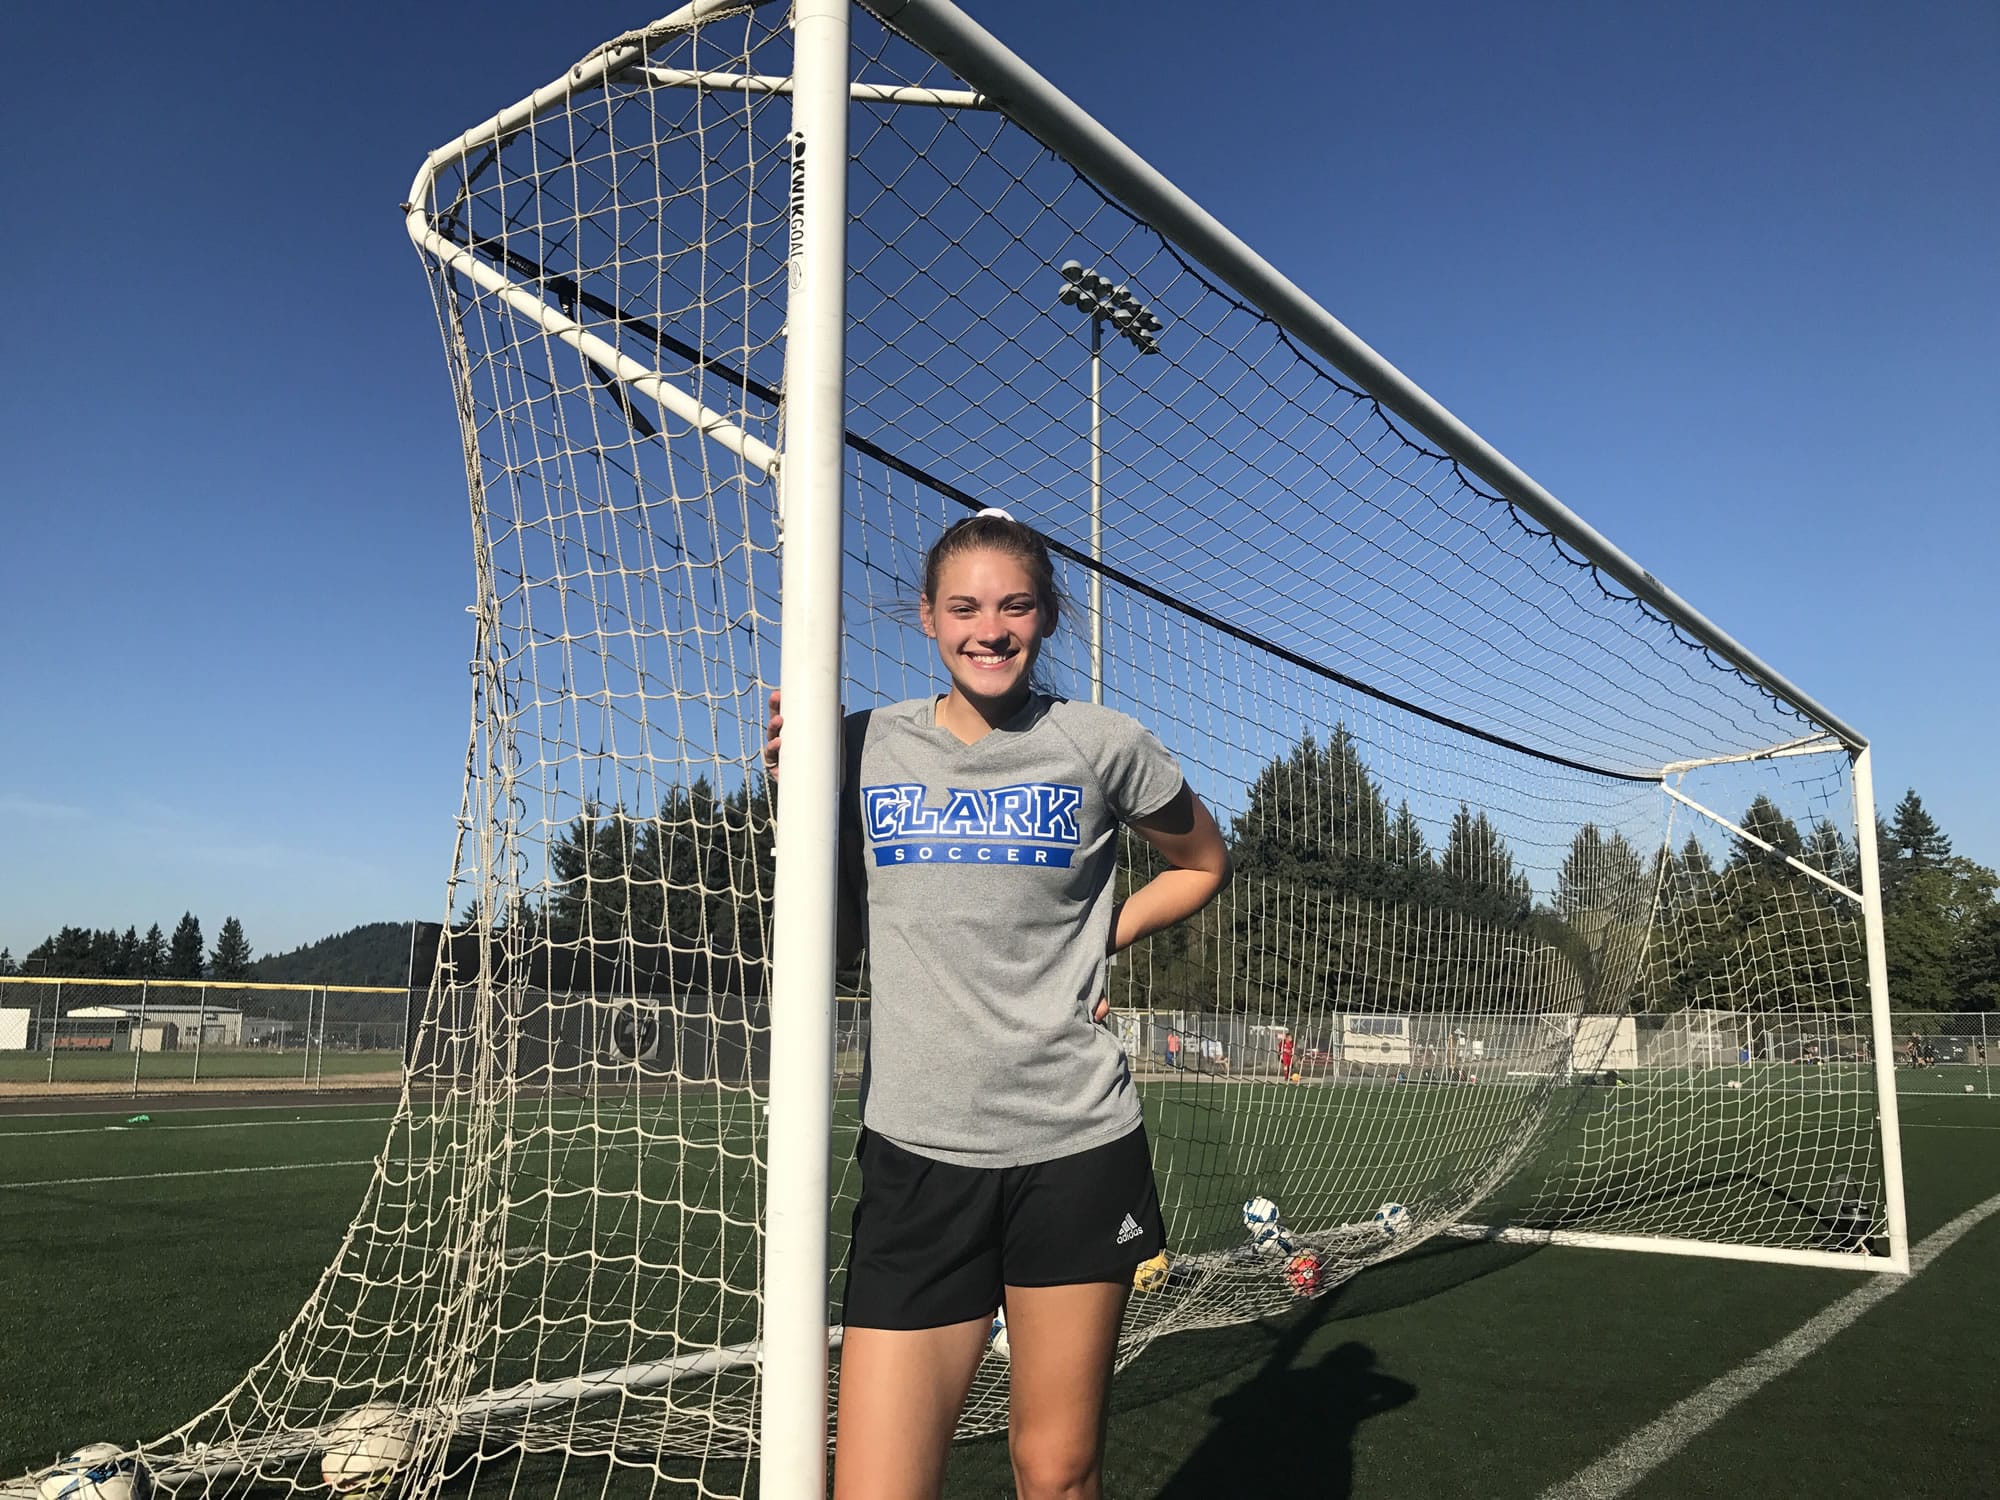 Clark College freshman defender Bailee McMahon said her mom, Nikki McElrath, is her favorite soccer player as well as her inspiration.